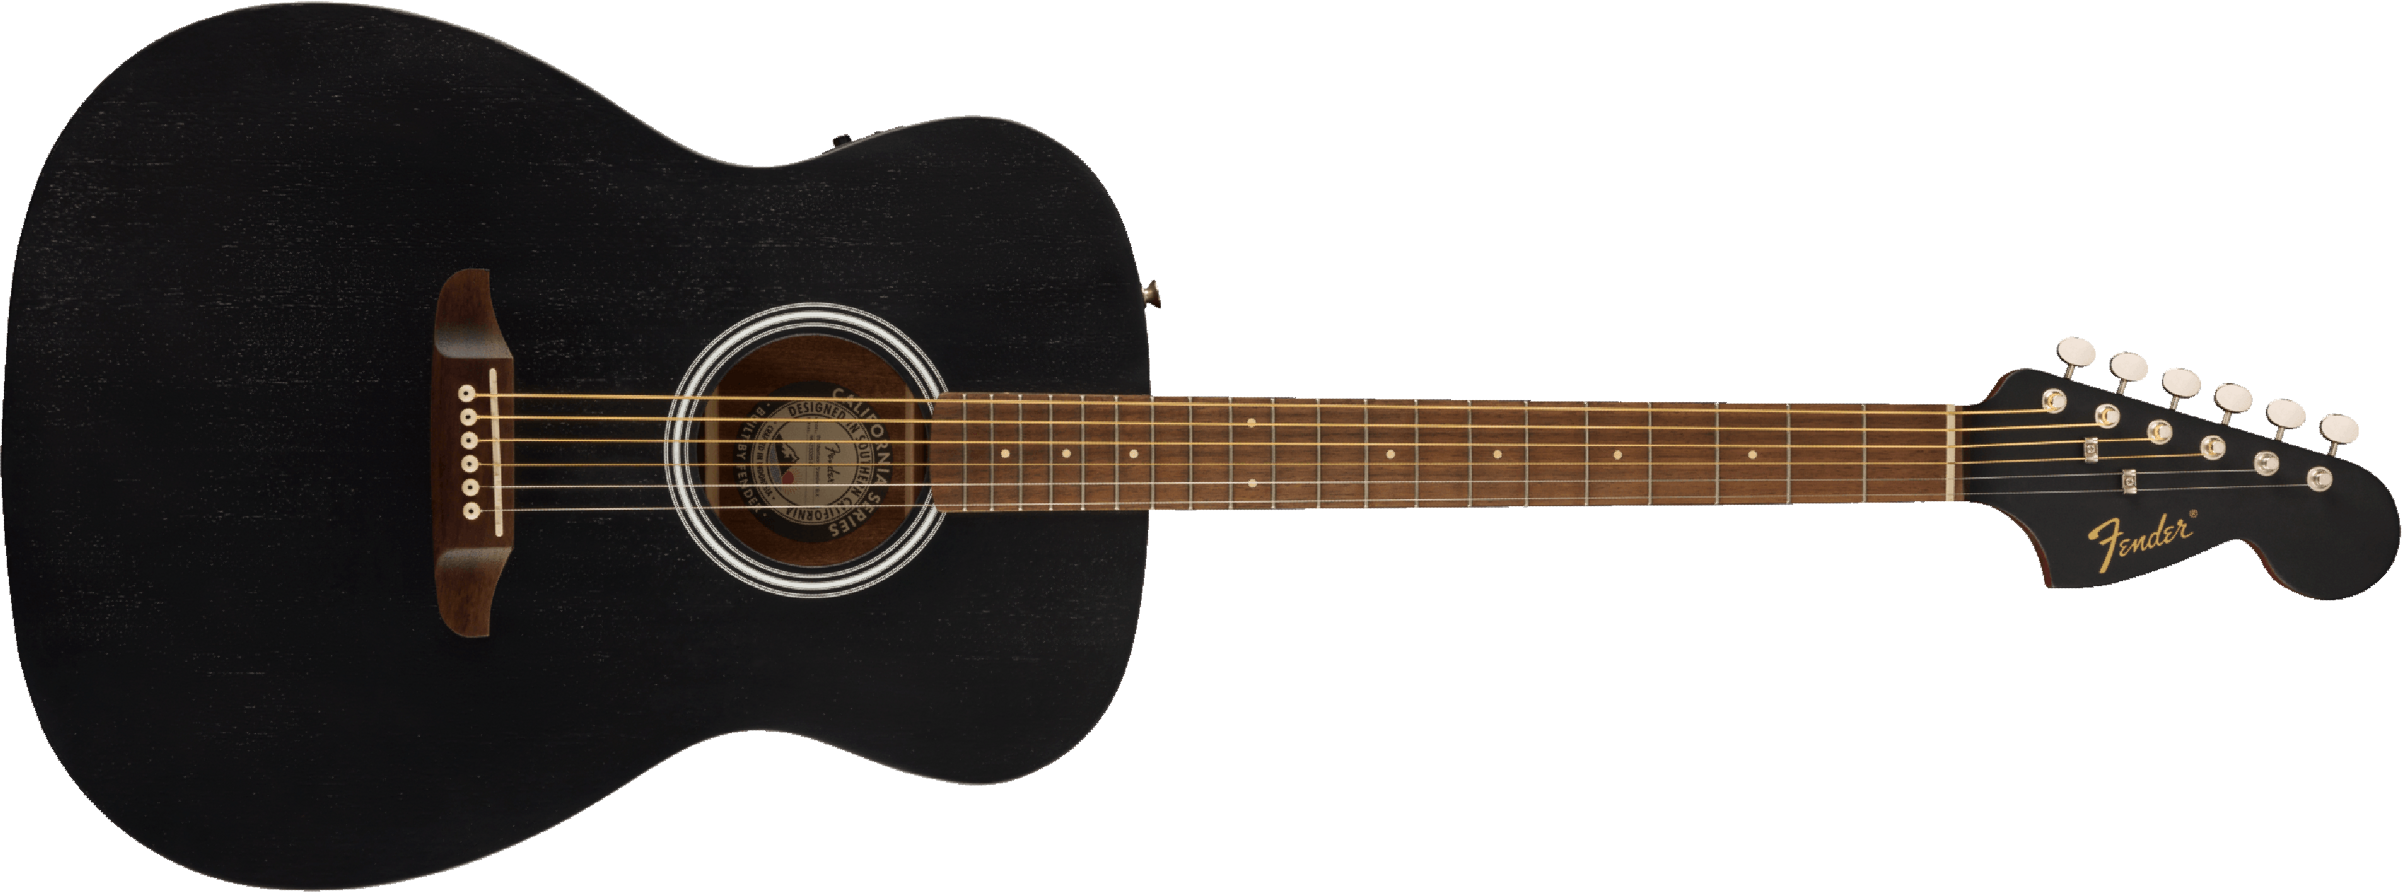 Fender Monterey Standard Sapelle Wal - Black Top - Acoustic guitar & electro - Main picture